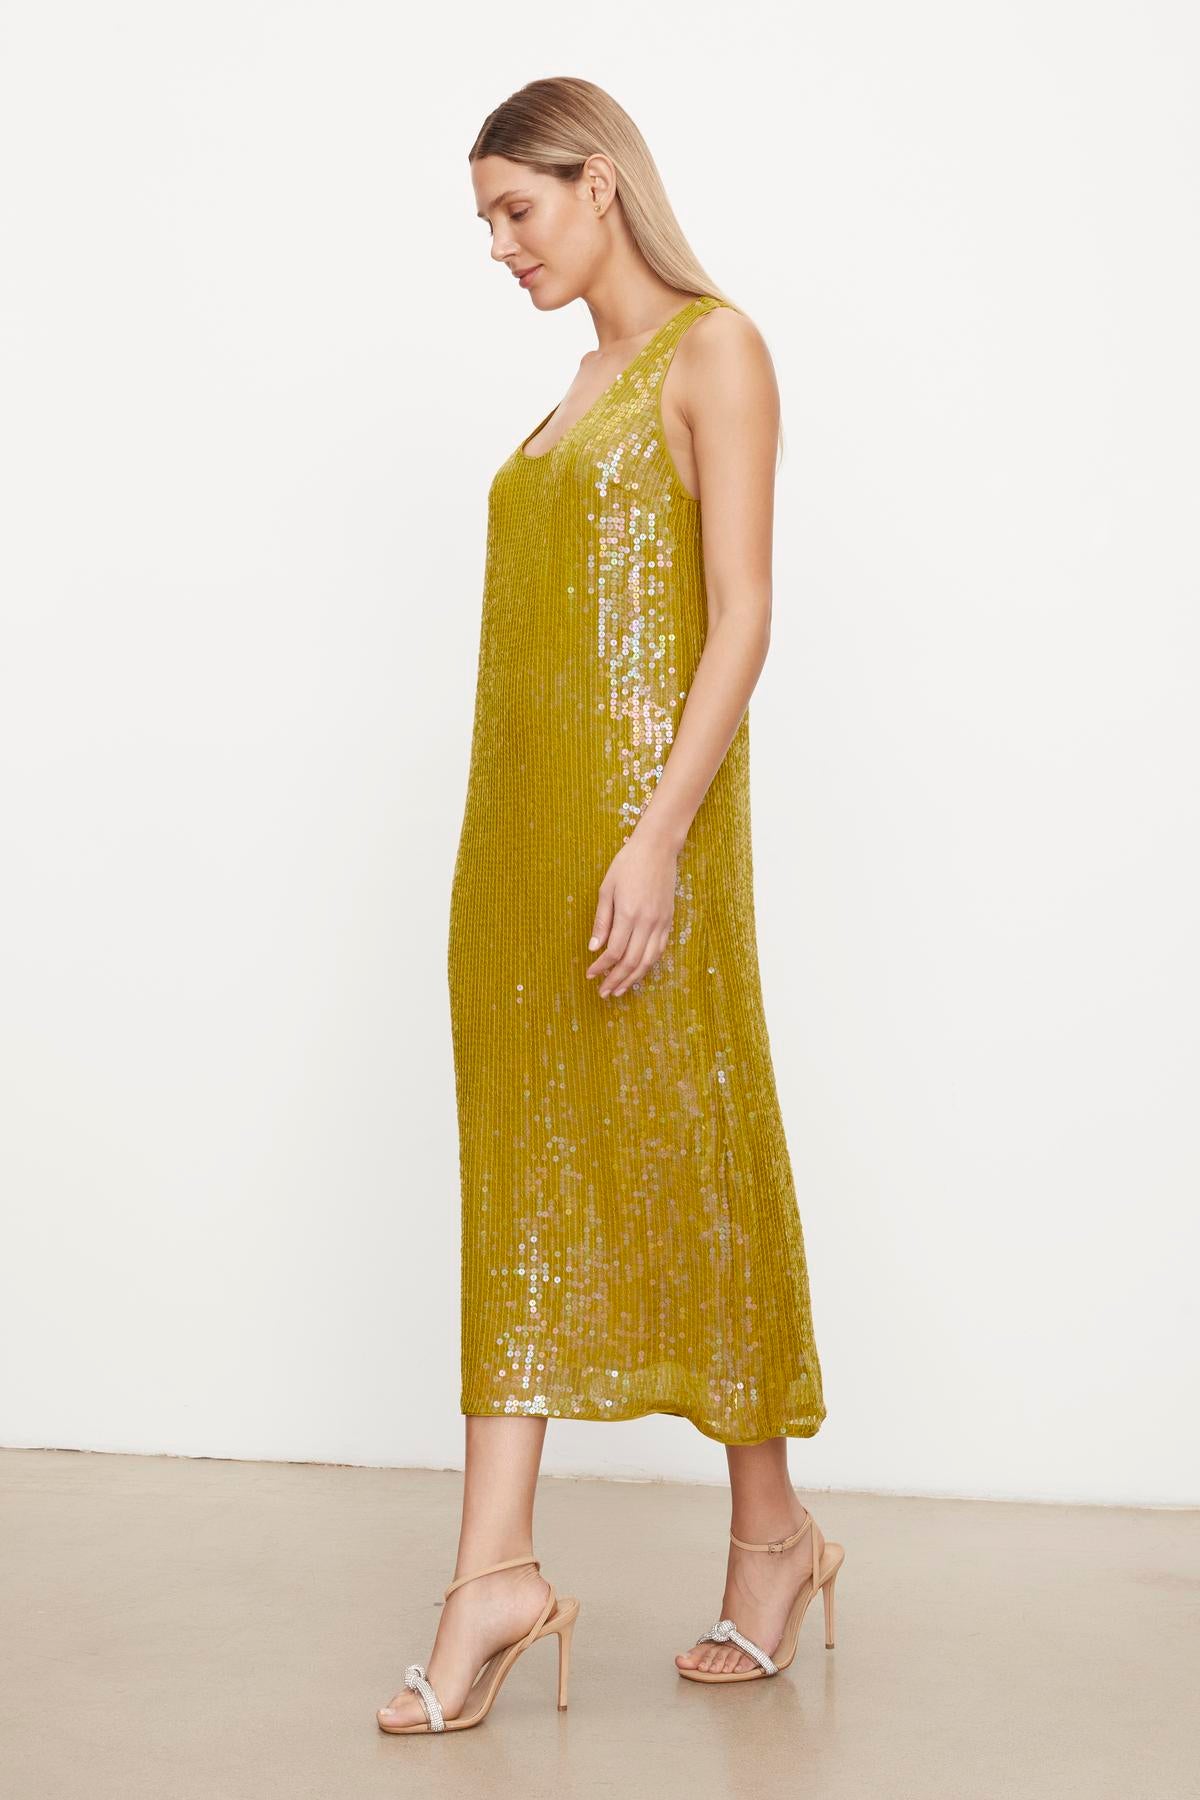   Woman in a yellow Velvet by Graham & Spencer ALENA SEQUIN TANK DRESS and beige heels standing against a plain background. 